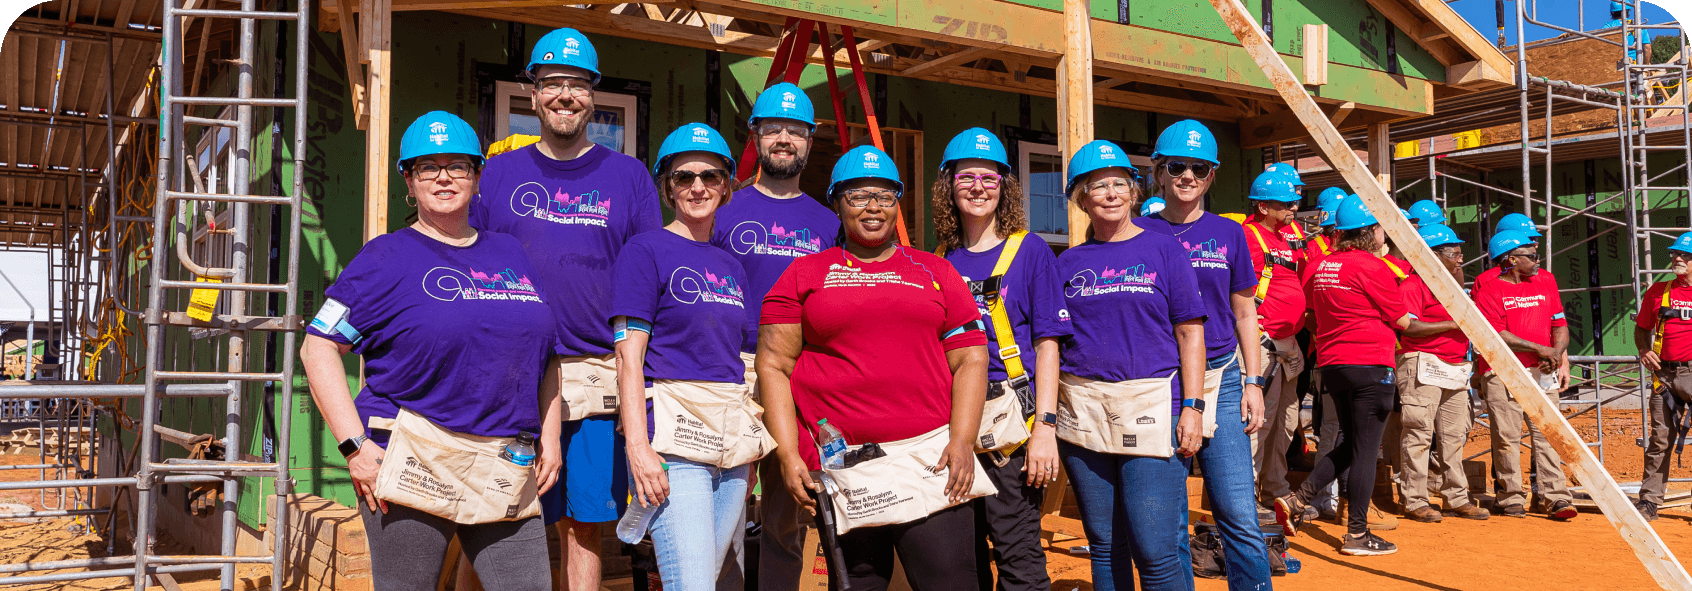 A group of Ally employees volunteering at a Habitat for Humanity work site.